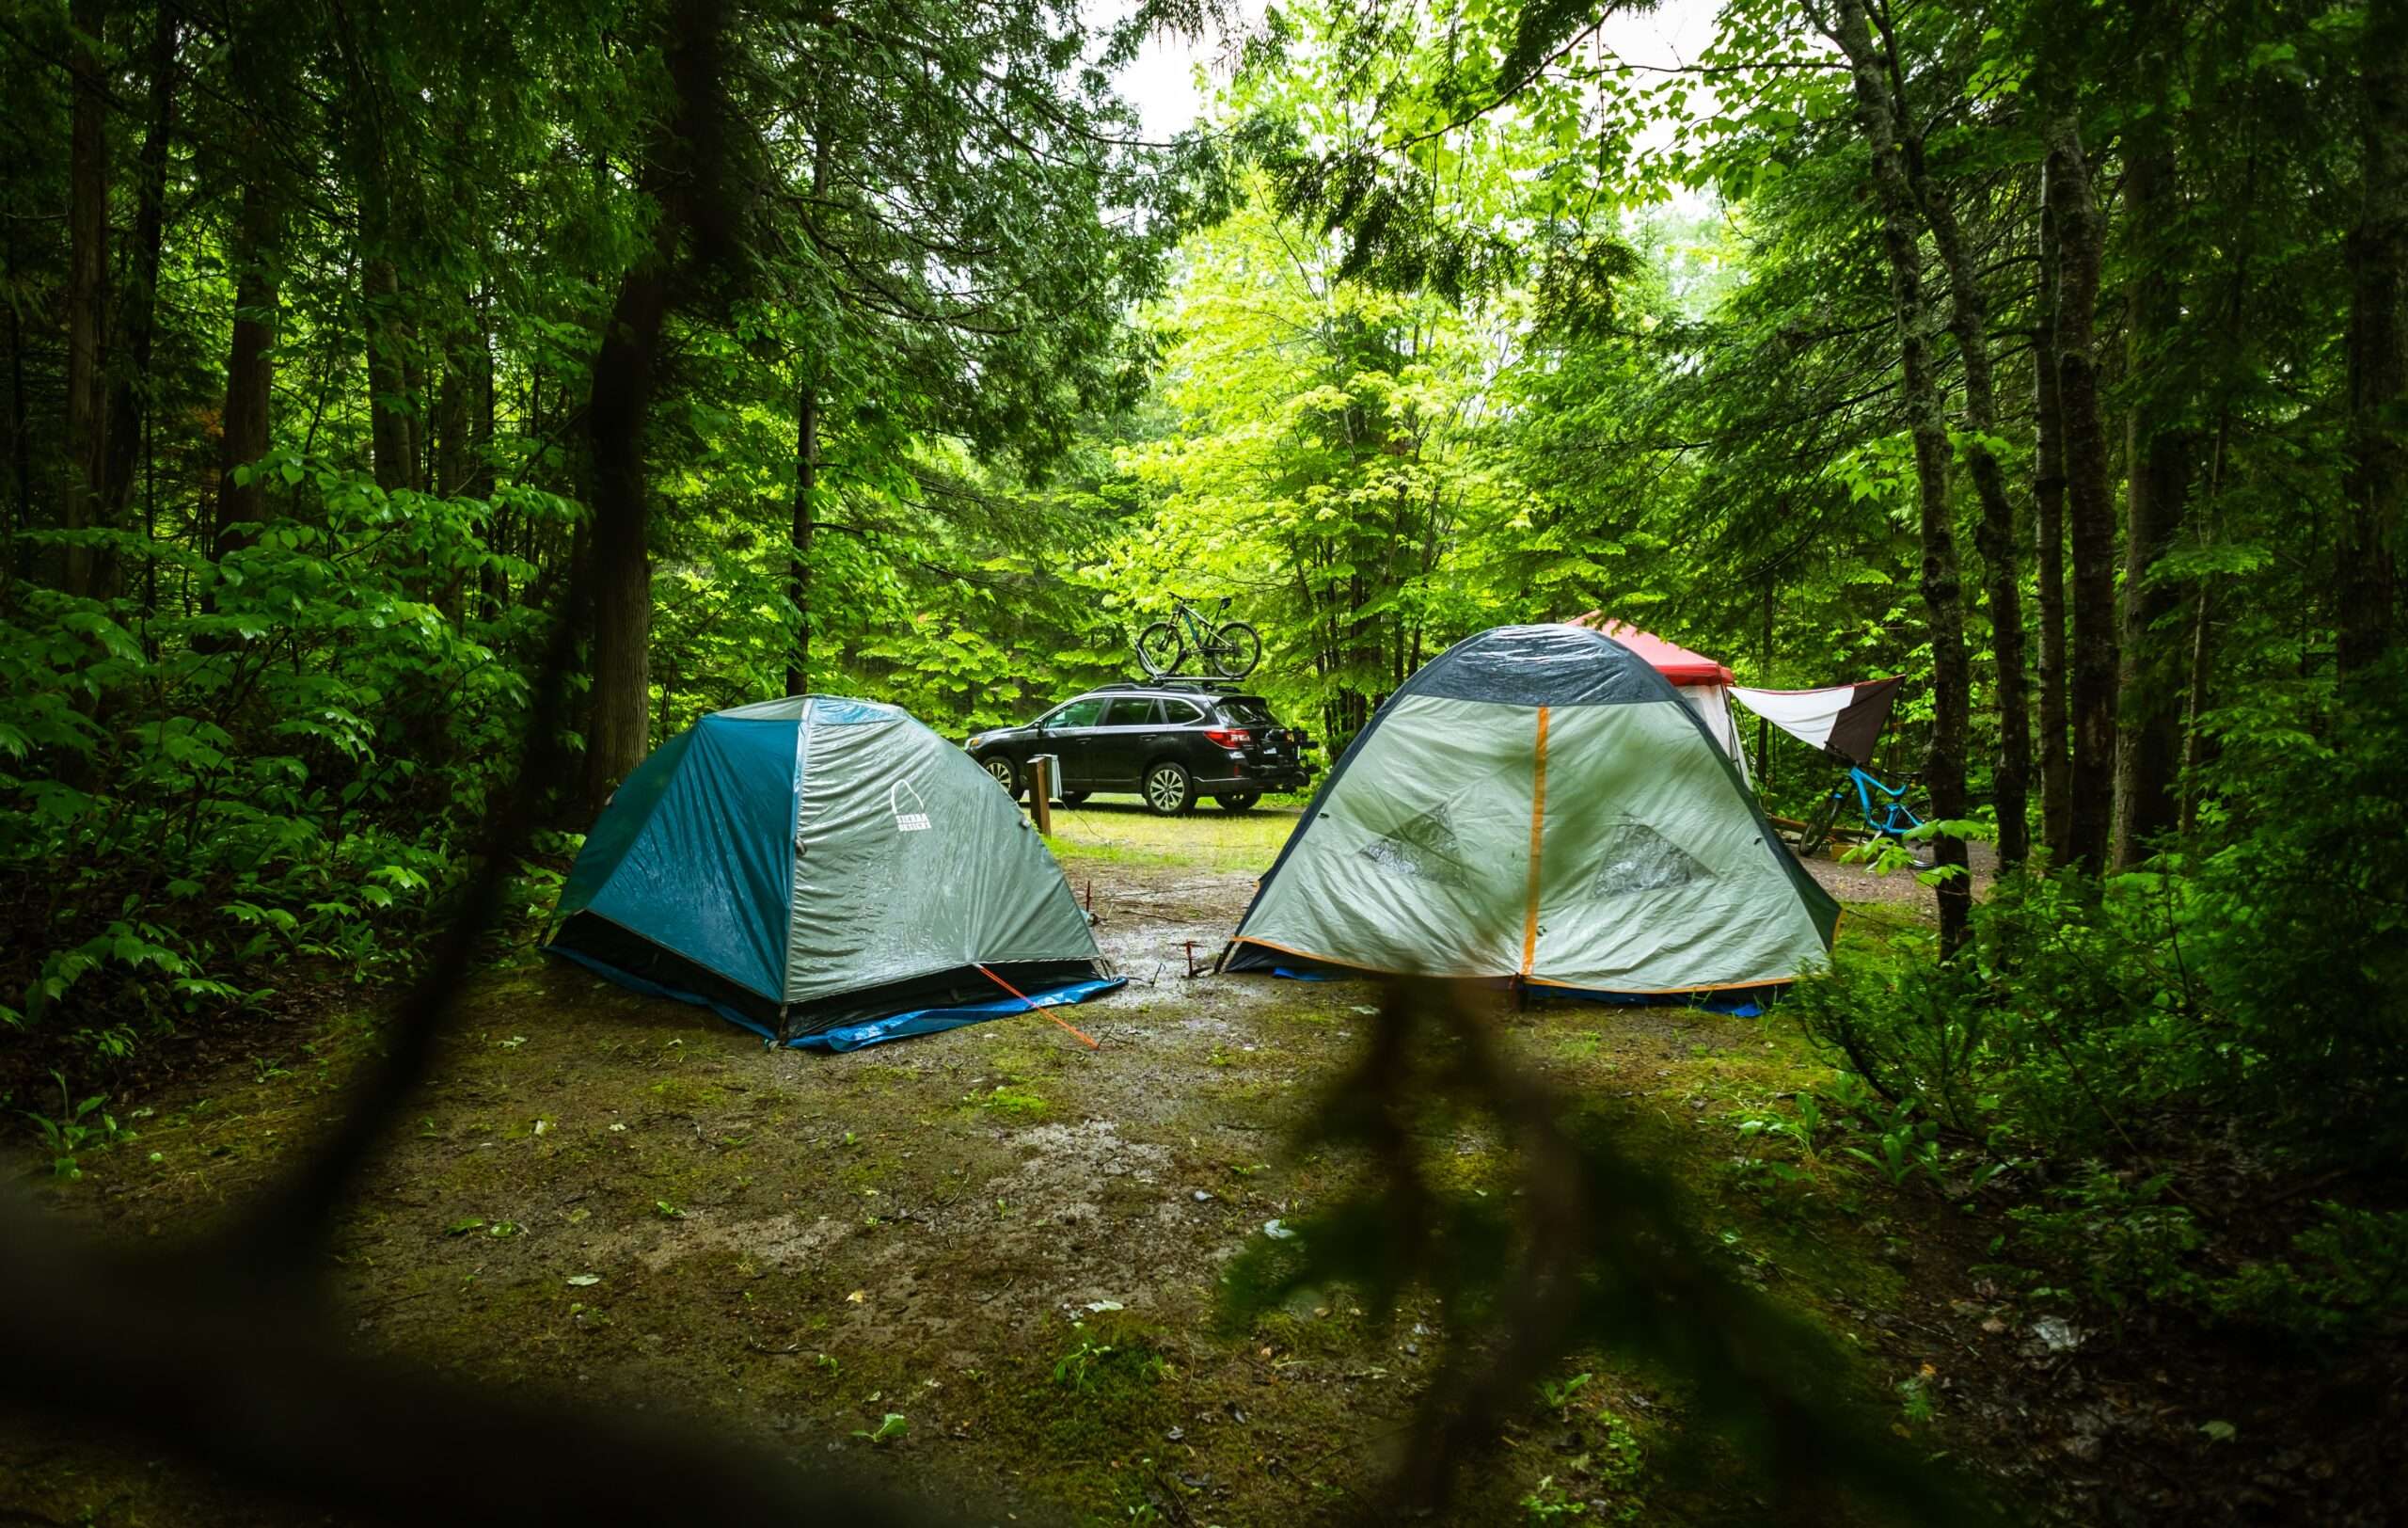 camping while raining in the forest